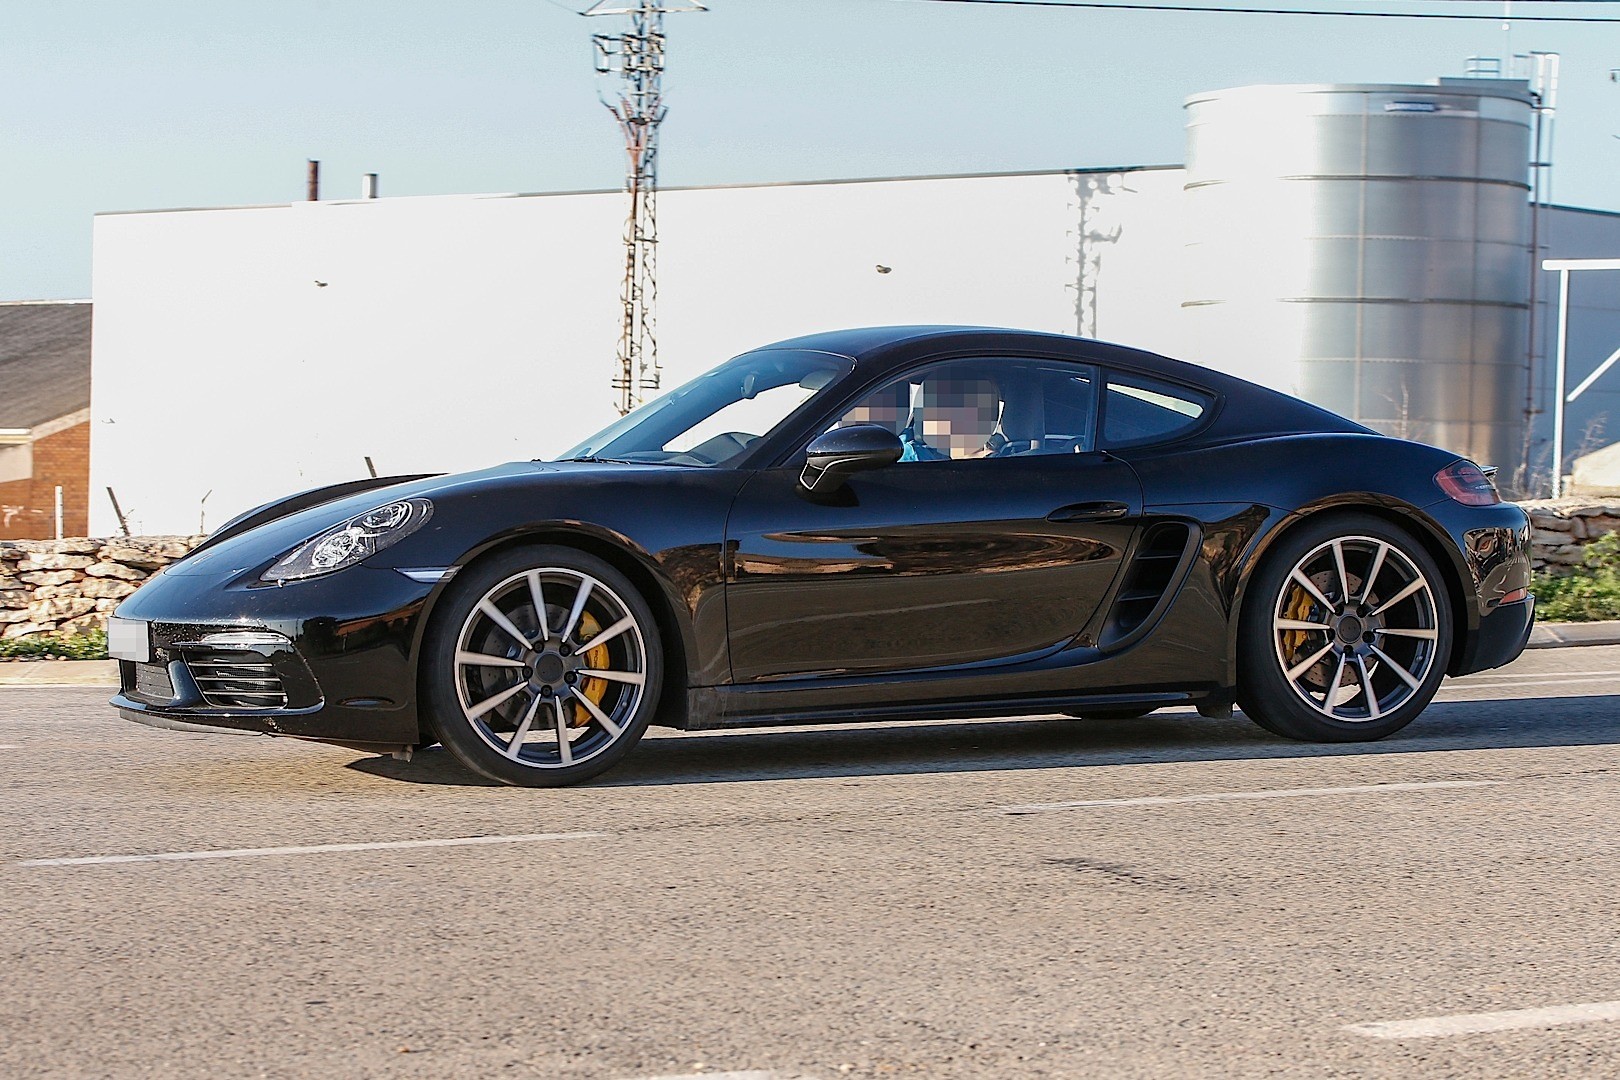 Porsche Cayman Spied Naked While Testing Turbo Four Engines Looks My Xxx Hot Girl